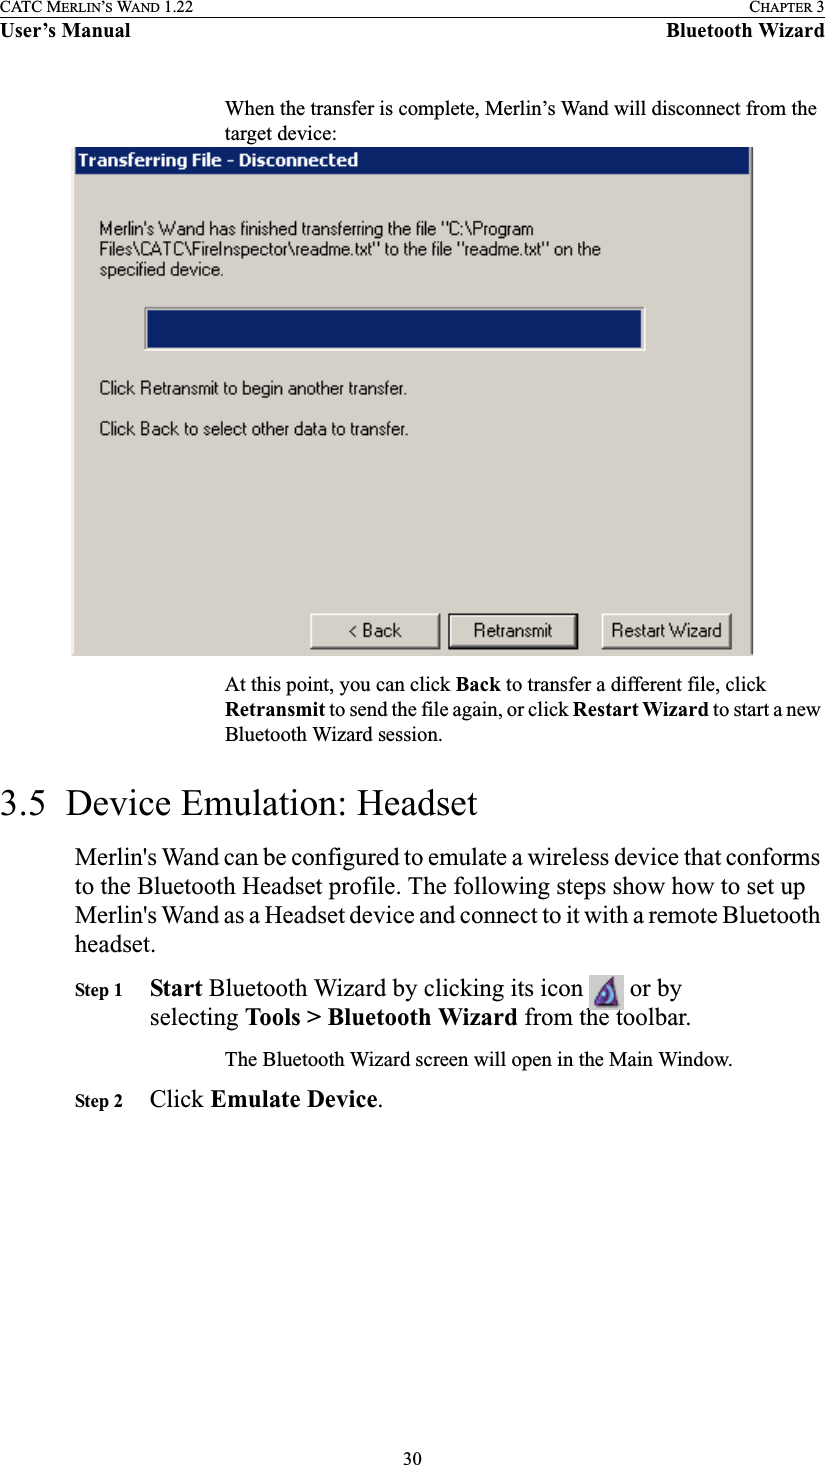 30CATC MERLIN’S WAND 1.22 CHAPTER 3User’s Manual Bluetooth WizardWhen the transfer is complete, Merlin’s Wand will disconnect from the target device:At this point, you can click Back to transfer a different file, click Retransmit to send the file again, or click Restart Wizard to start a new Bluetooth Wizard session.3.5  Device Emulation: HeadsetMerlin&apos;s Wand can be configured to emulate a wireless device that conforms to the Bluetooth Headset profile. The following steps show how to set up Merlin&apos;s Wand as a Headset device and connect to it with a remote Bluetooth headset.Step 1 Start Bluetooth Wizard by clicking its icon   or by selecting Tools &gt; Bluetooth Wizard from the toolbar.The Bluetooth Wizard screen will open in the Main Window.Step 2 Click Emulate Device.